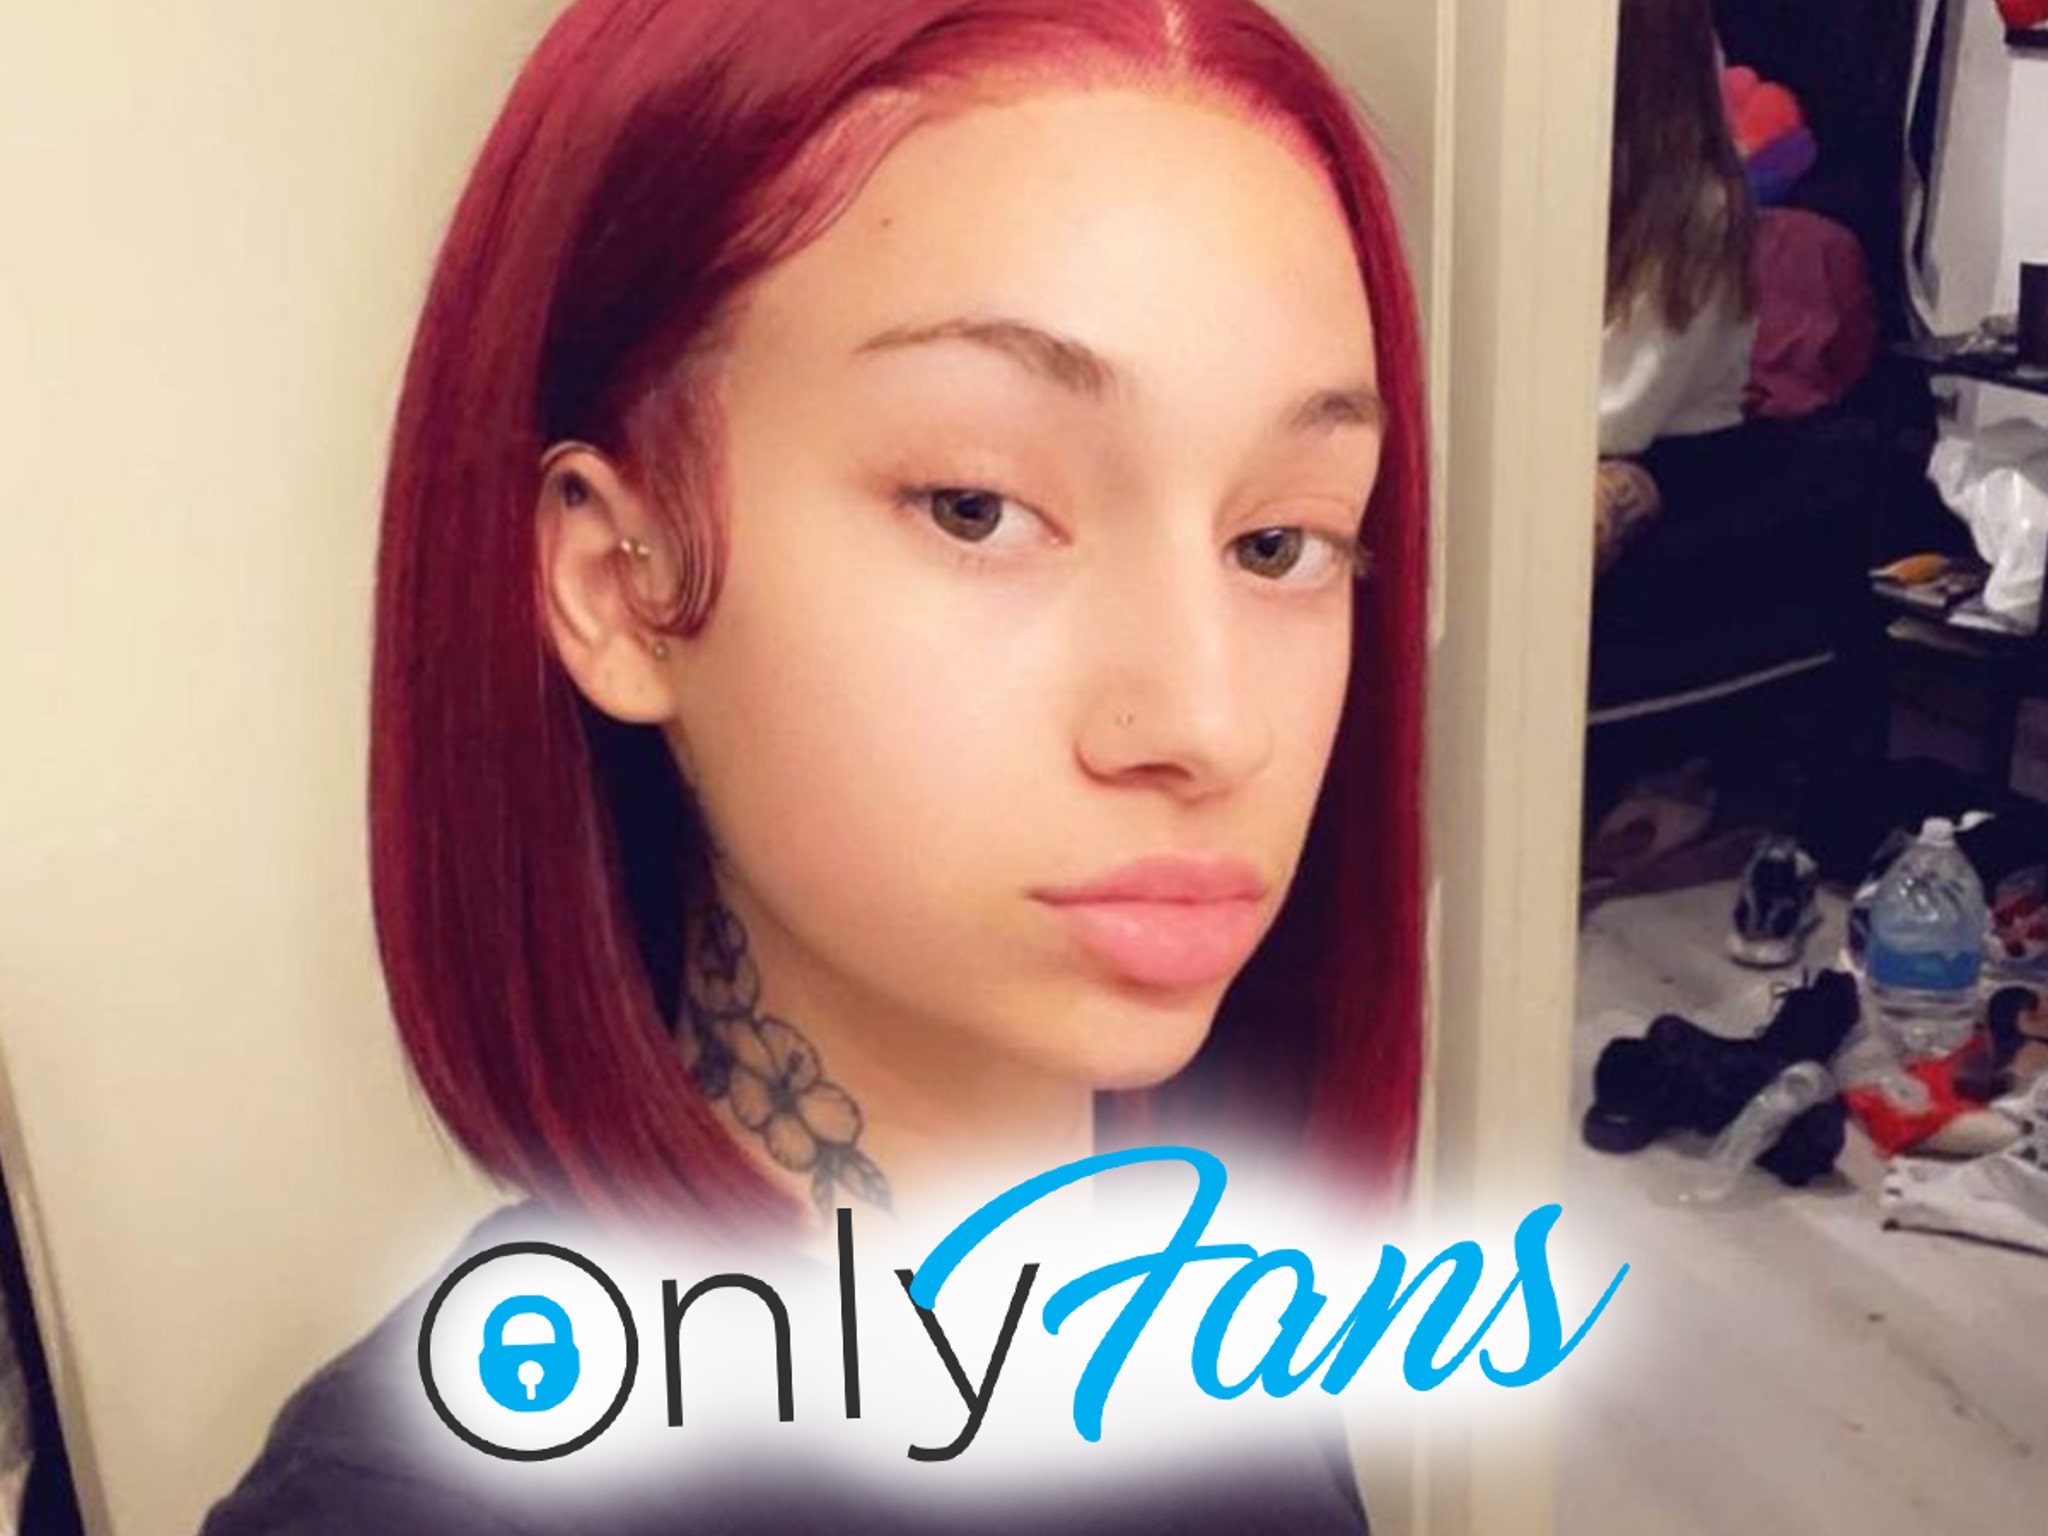 Bhabie fans only bhad What is